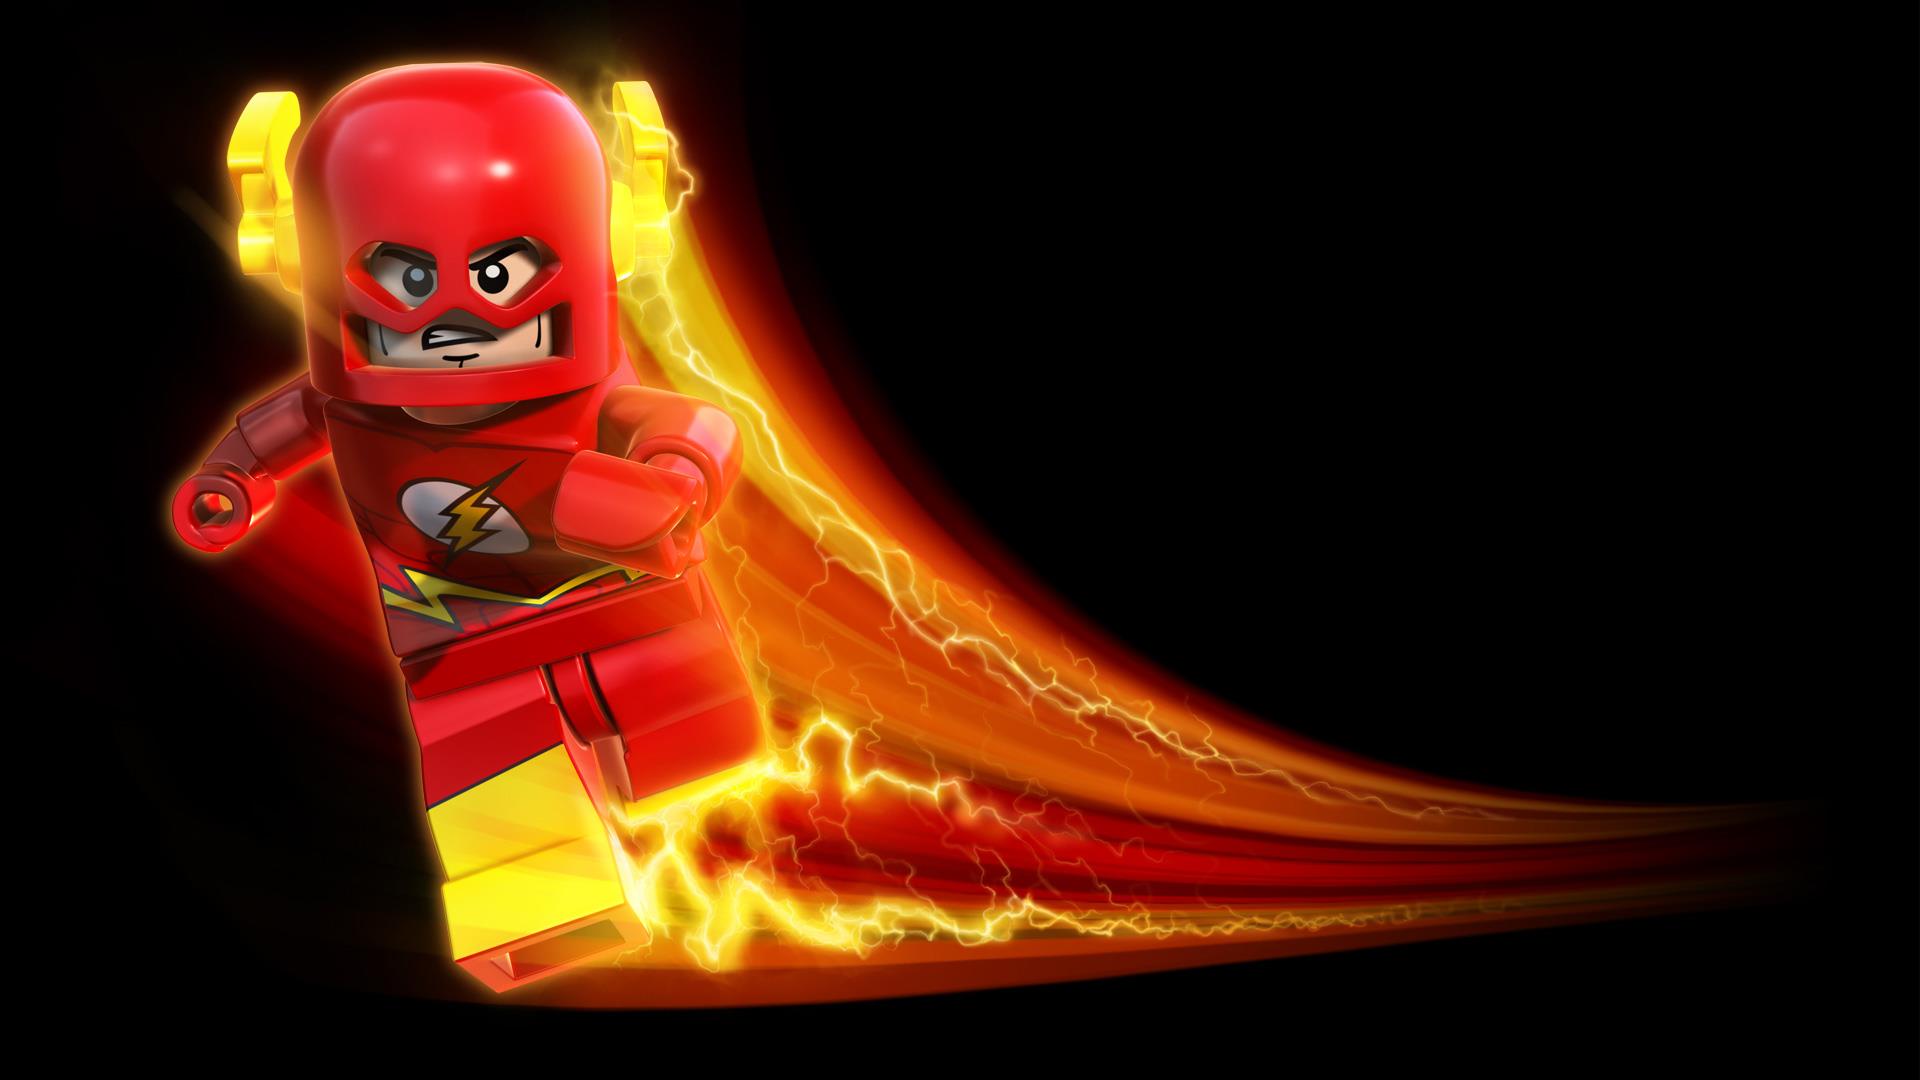 Share This Lego Flash My Current Favorite Wallpaper